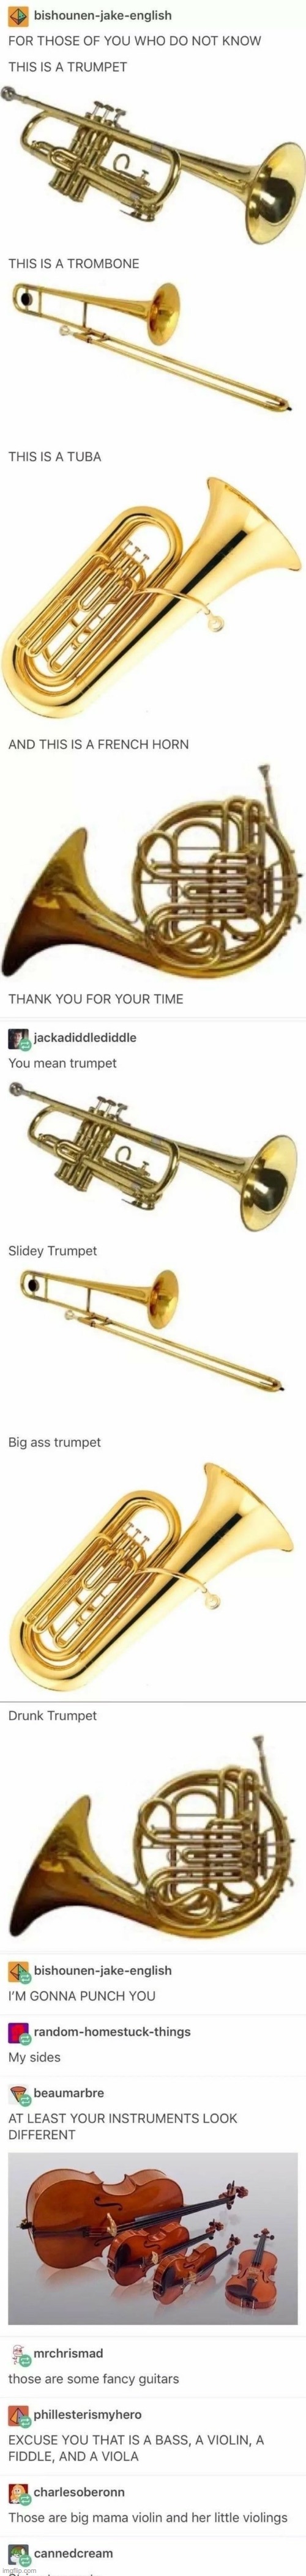 the trumpet | image tagged in trumpet,violin | made w/ Imgflip meme maker